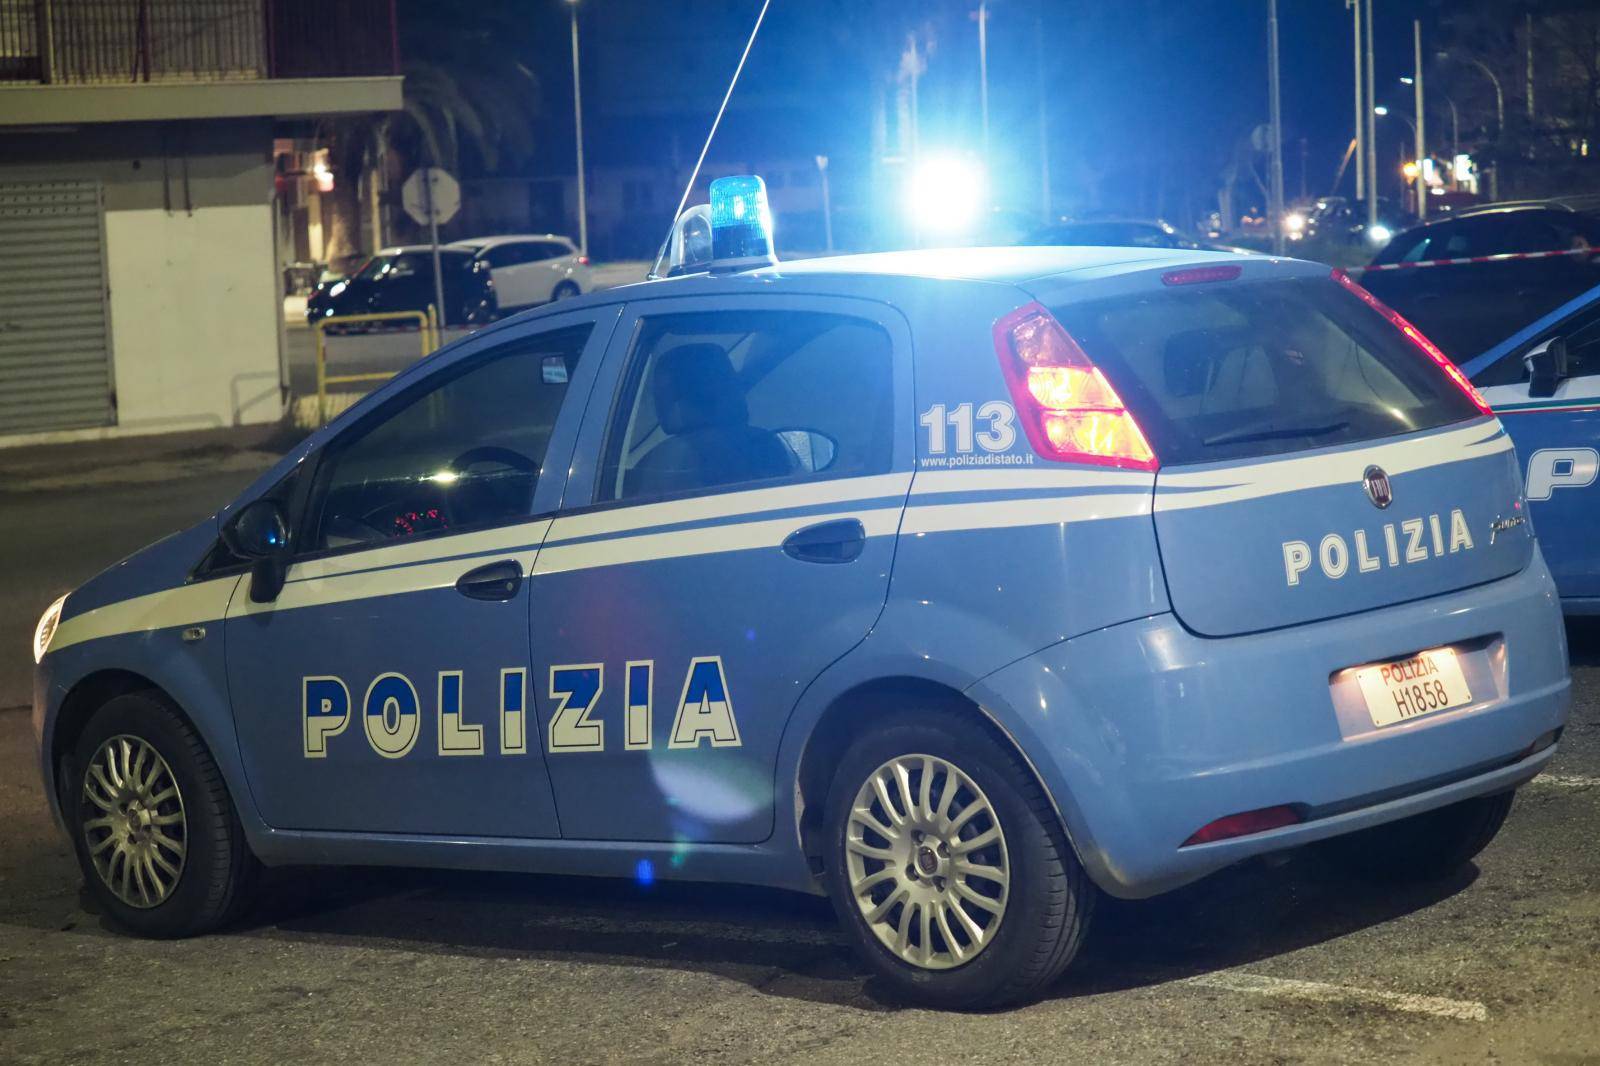 Calabria, attempted murder, wounded in the head a 26-year-old palace